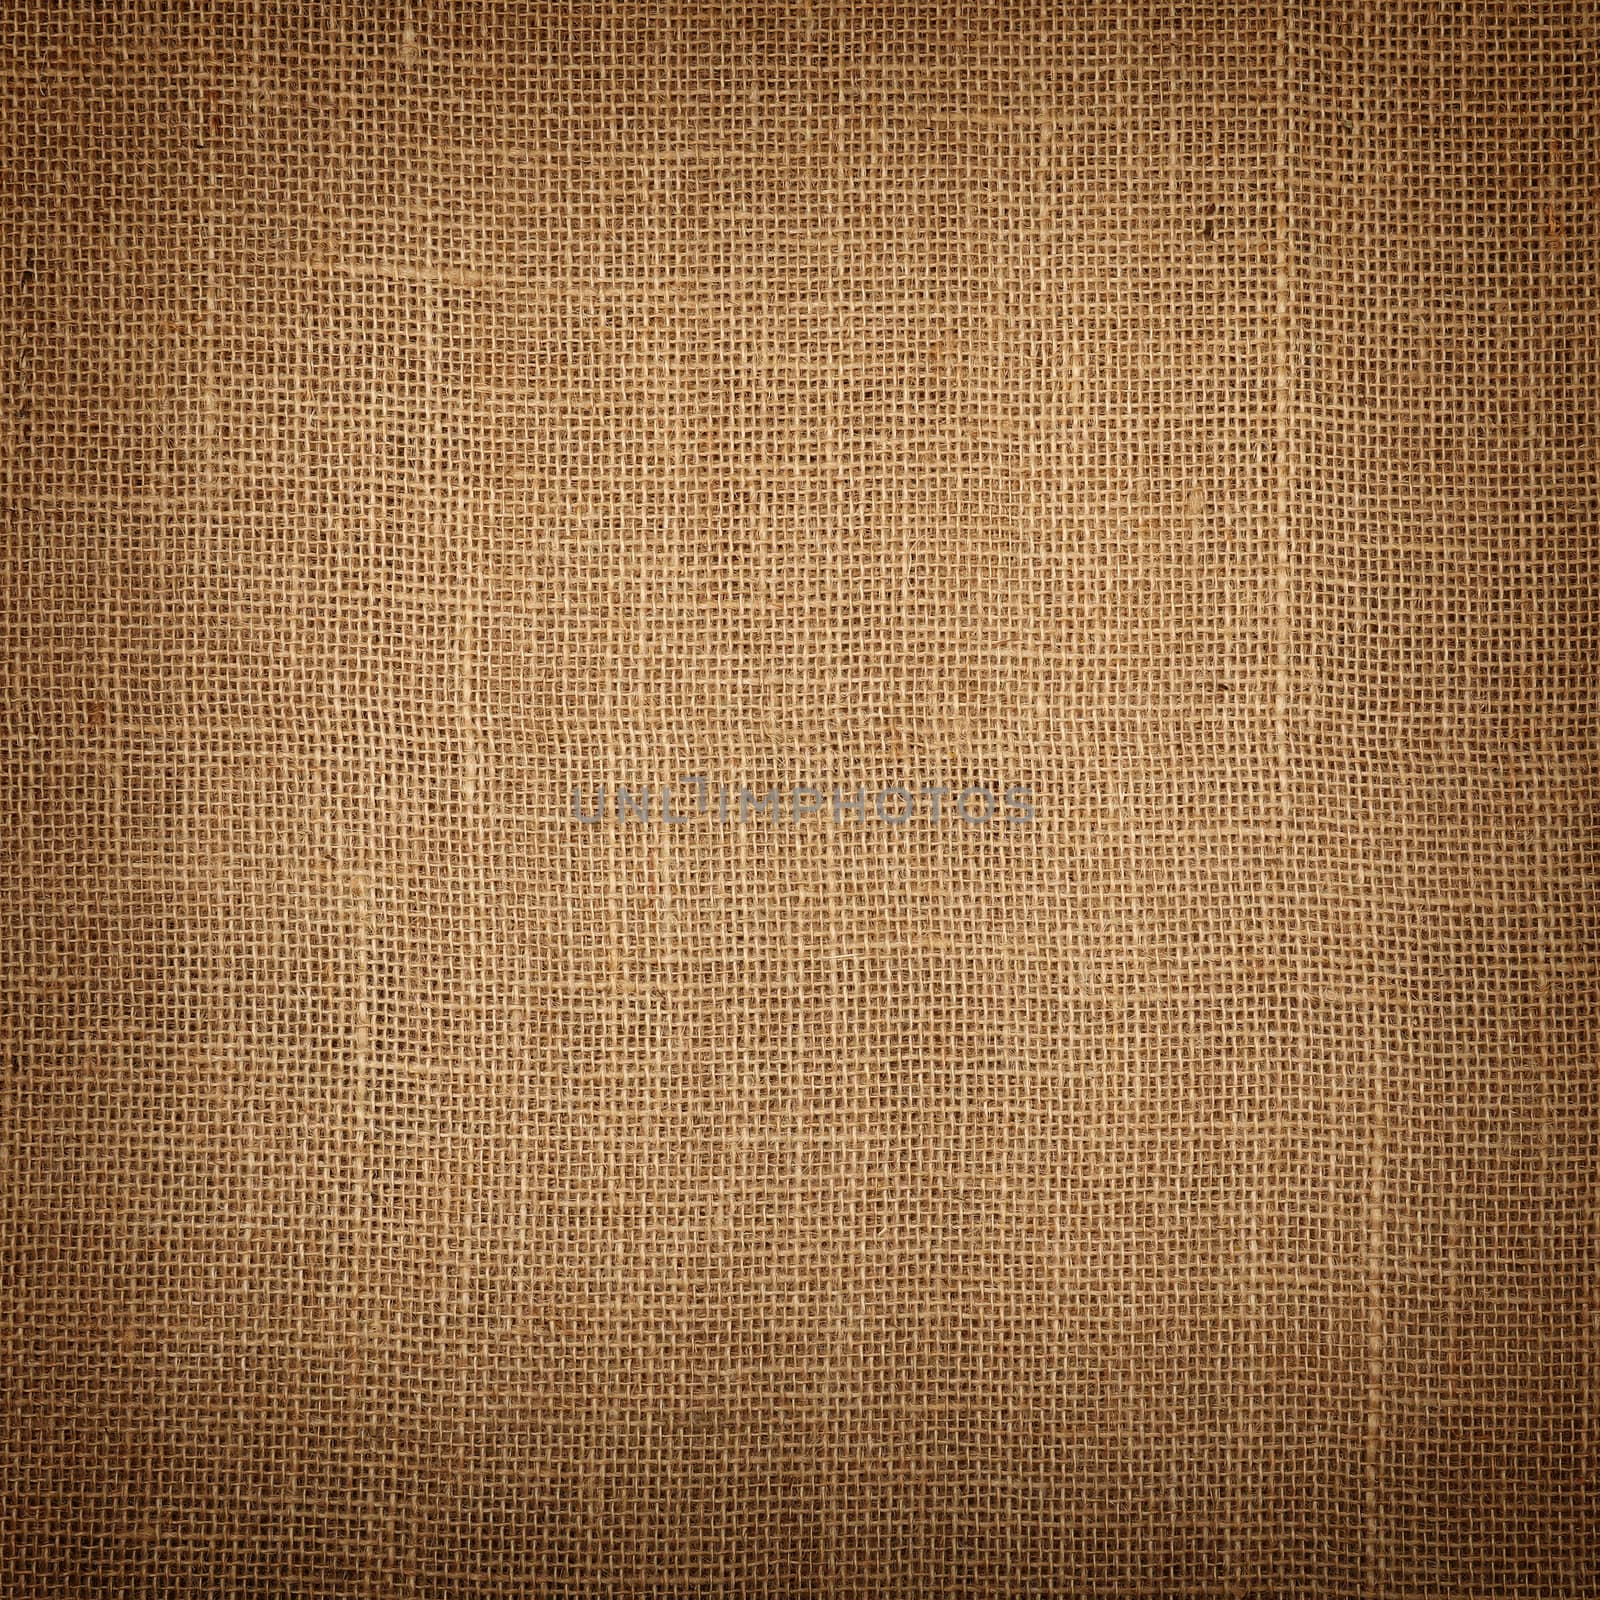 Brown burlap jute canvas background with shade by BreakingTheWalls